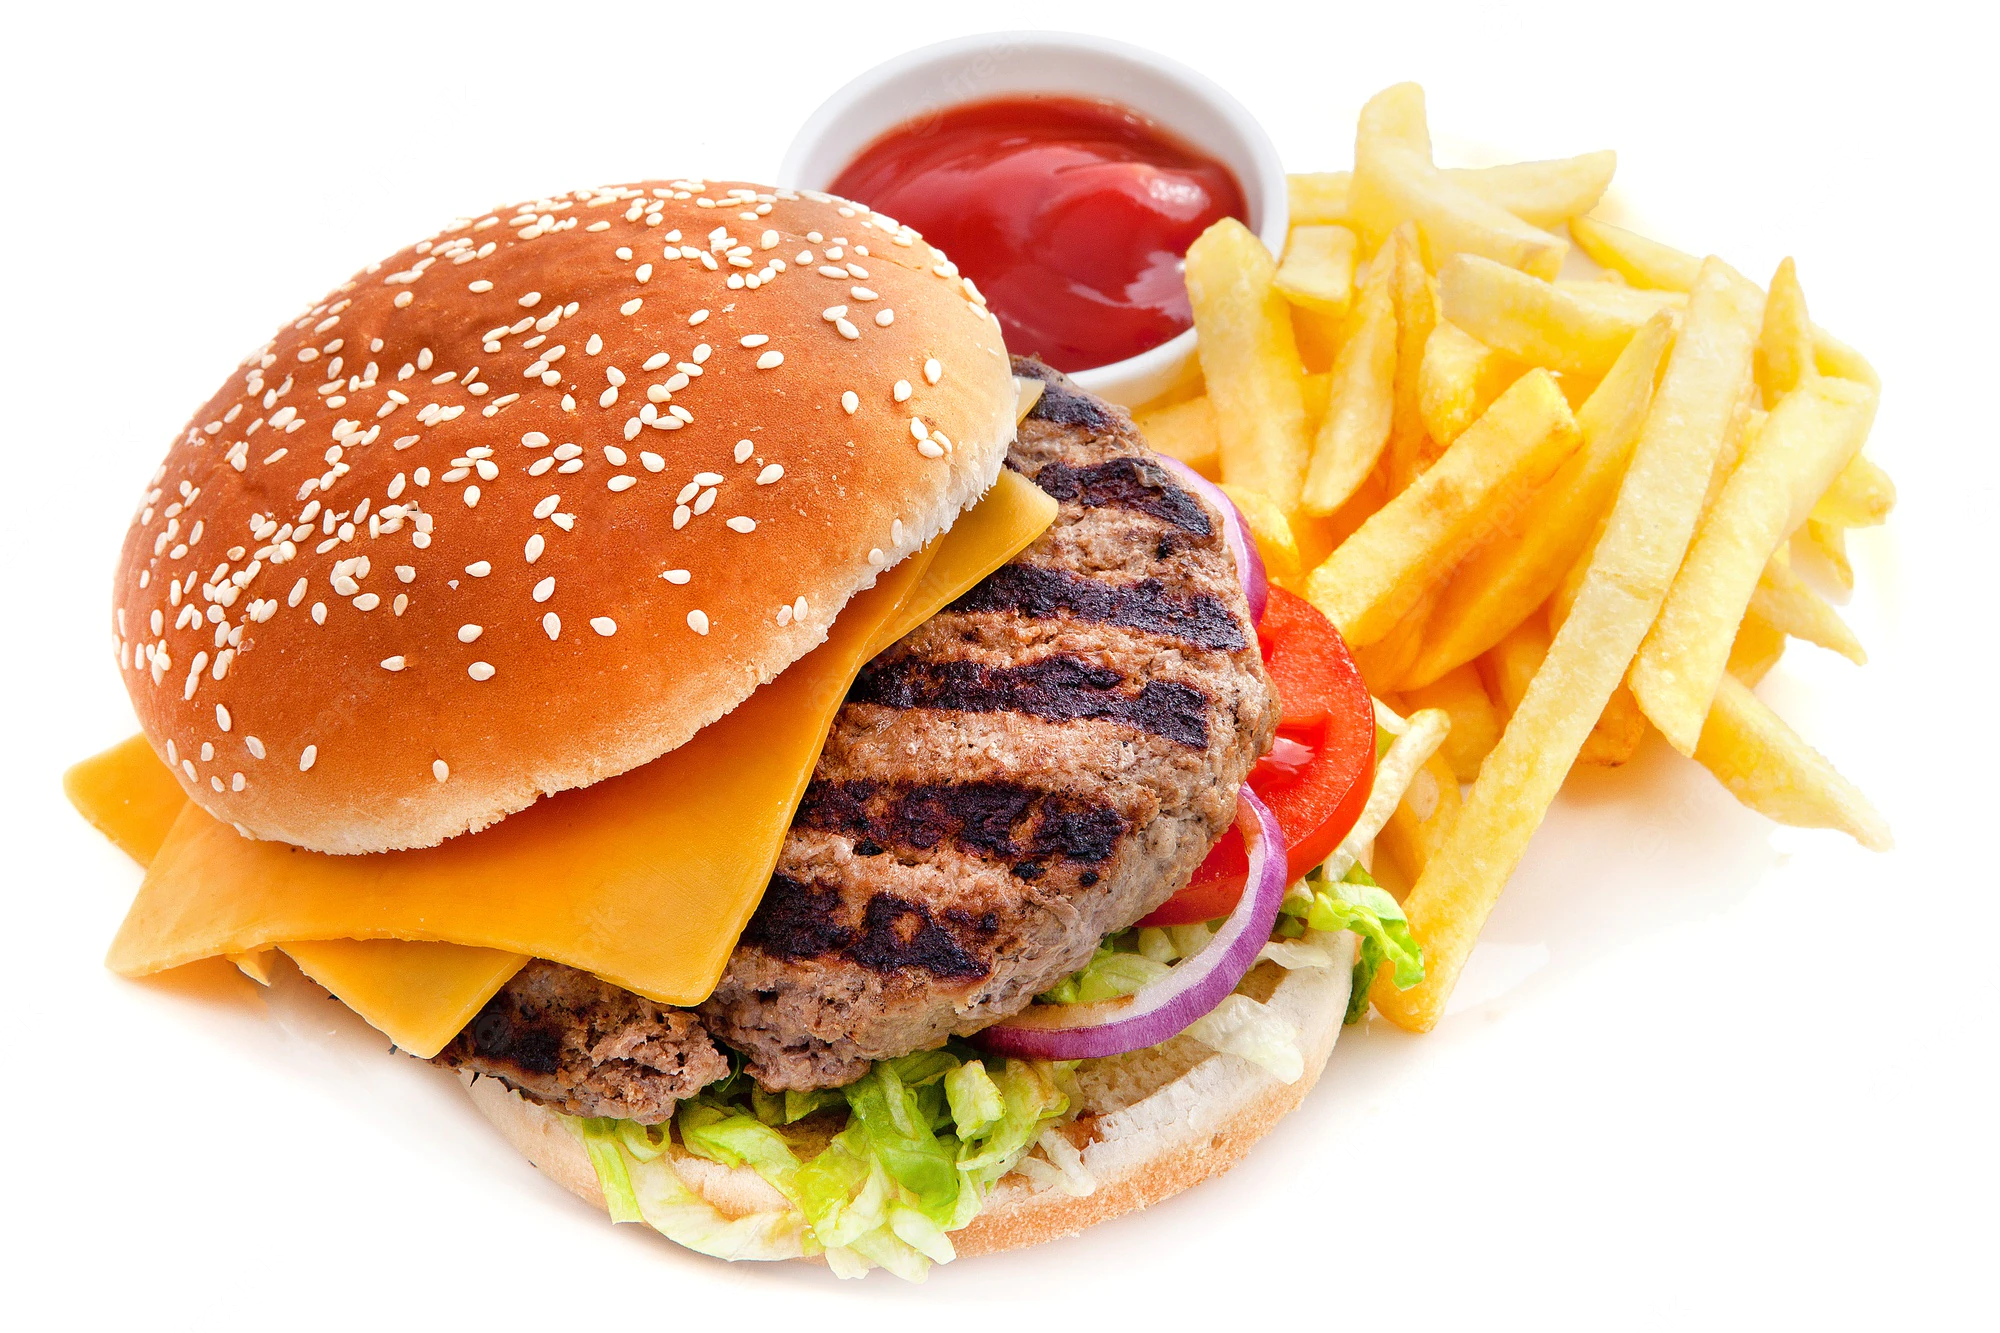 cheeseburger-with-french-fries_67473-4